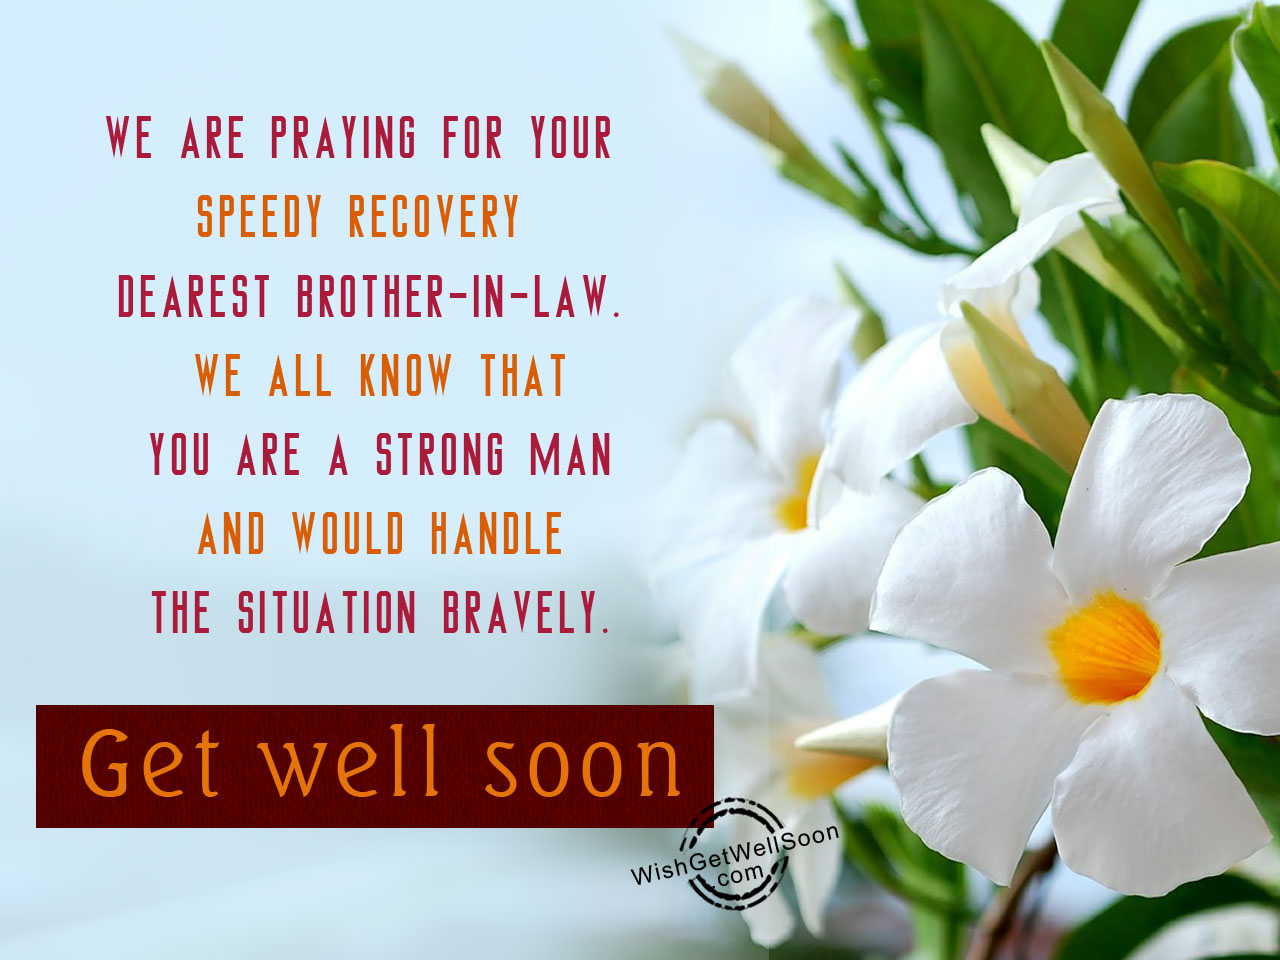 We are praying for your speedy recovery